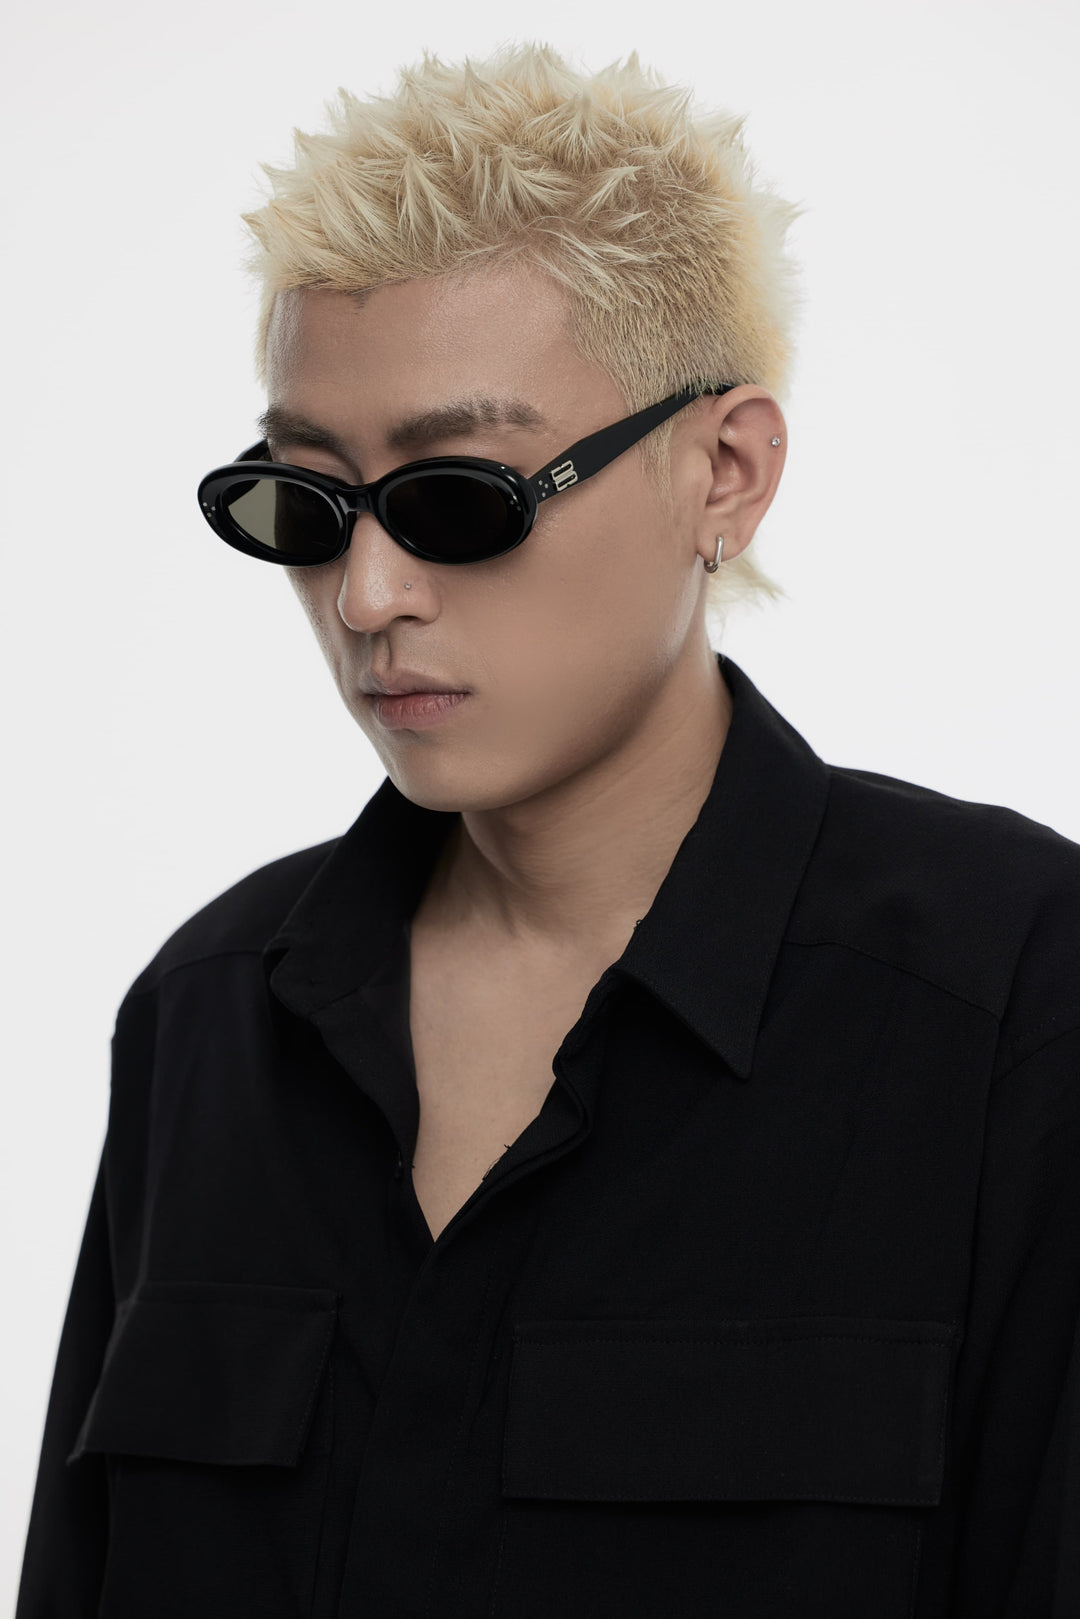 Model of his side face looking down wearing Breath in black Korean Fashion Sunglasses from Mercury Retrograde Burr Puzzle Collection 